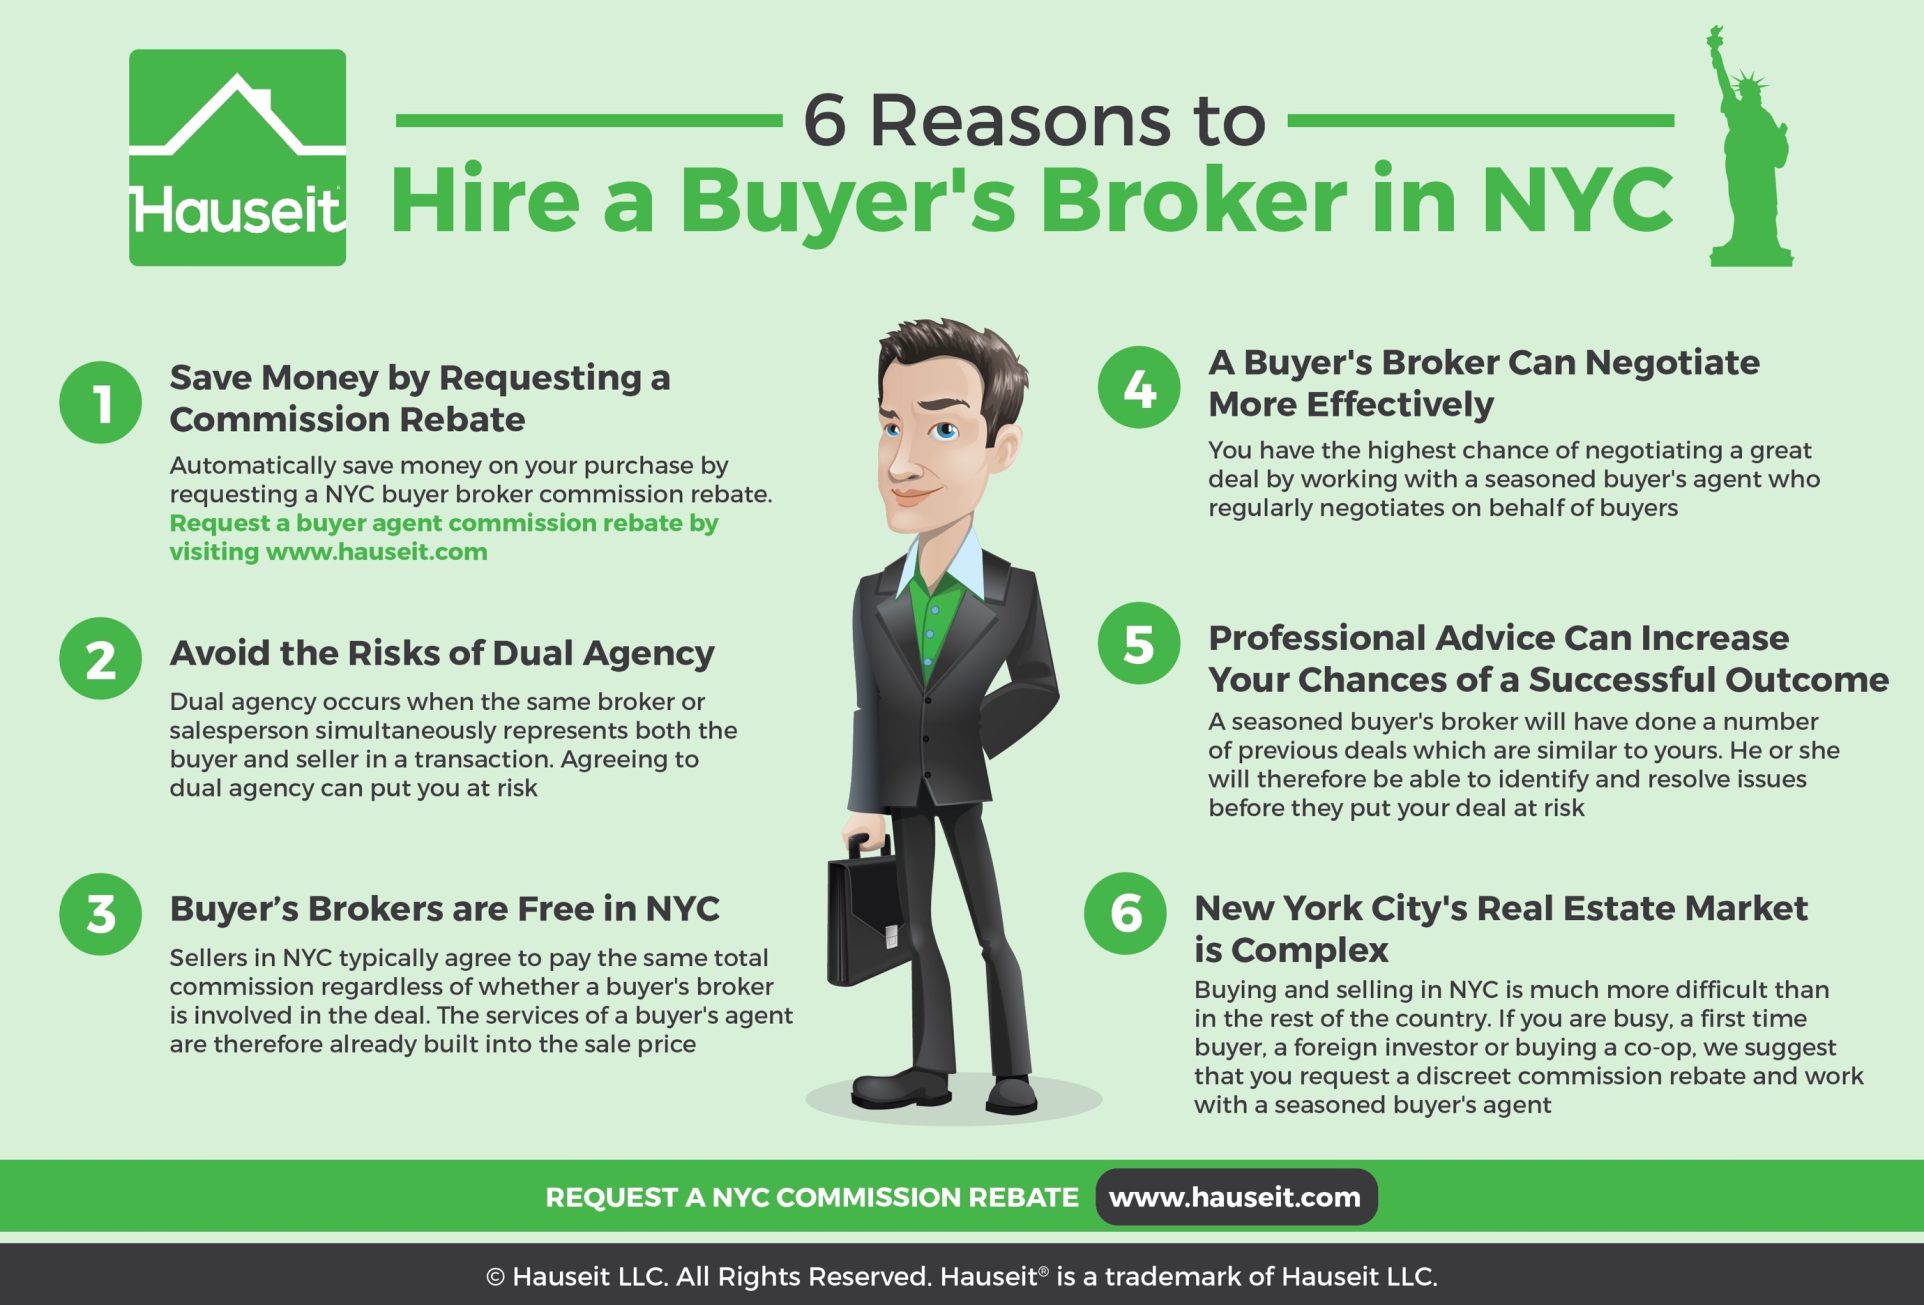 6 Reasons To Hire a Buyer’s Broker in NYC